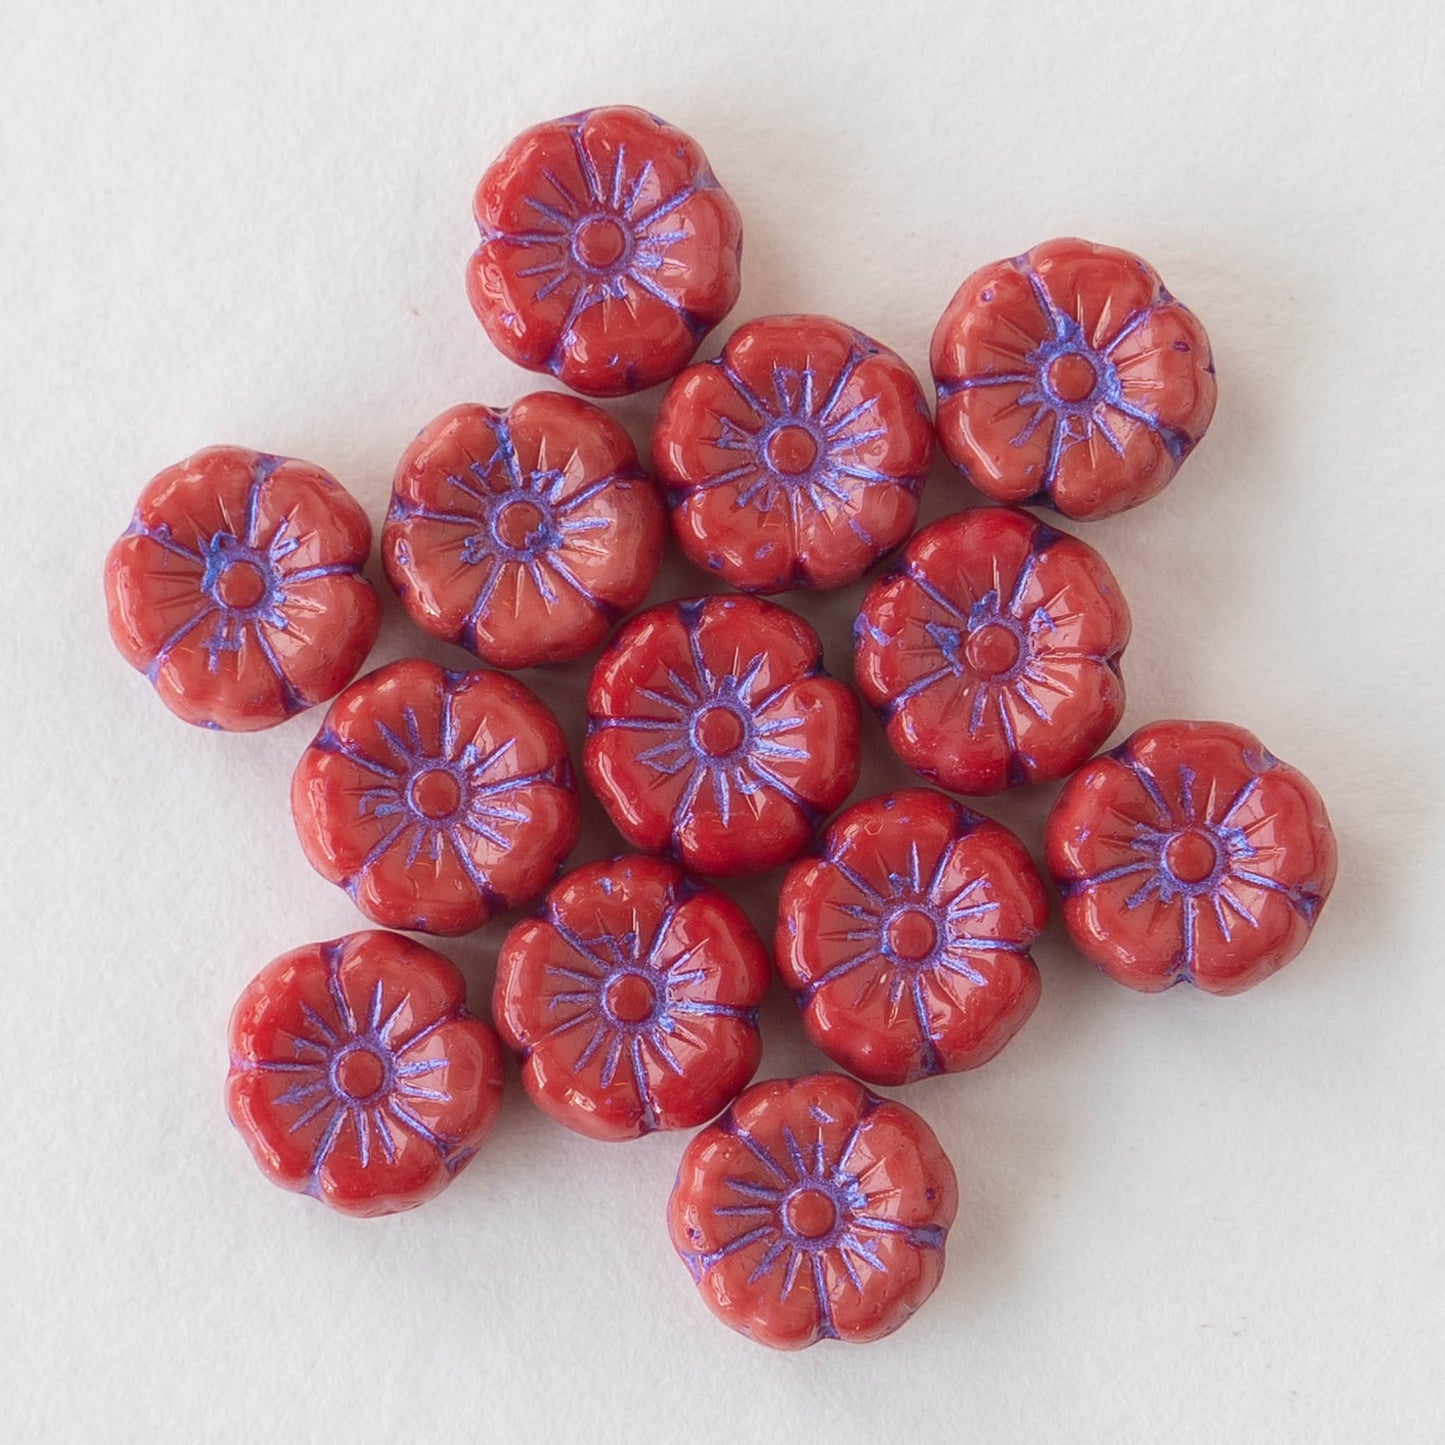 8mm Glass Flower Beads - Red with Purple Wash - 20 beads